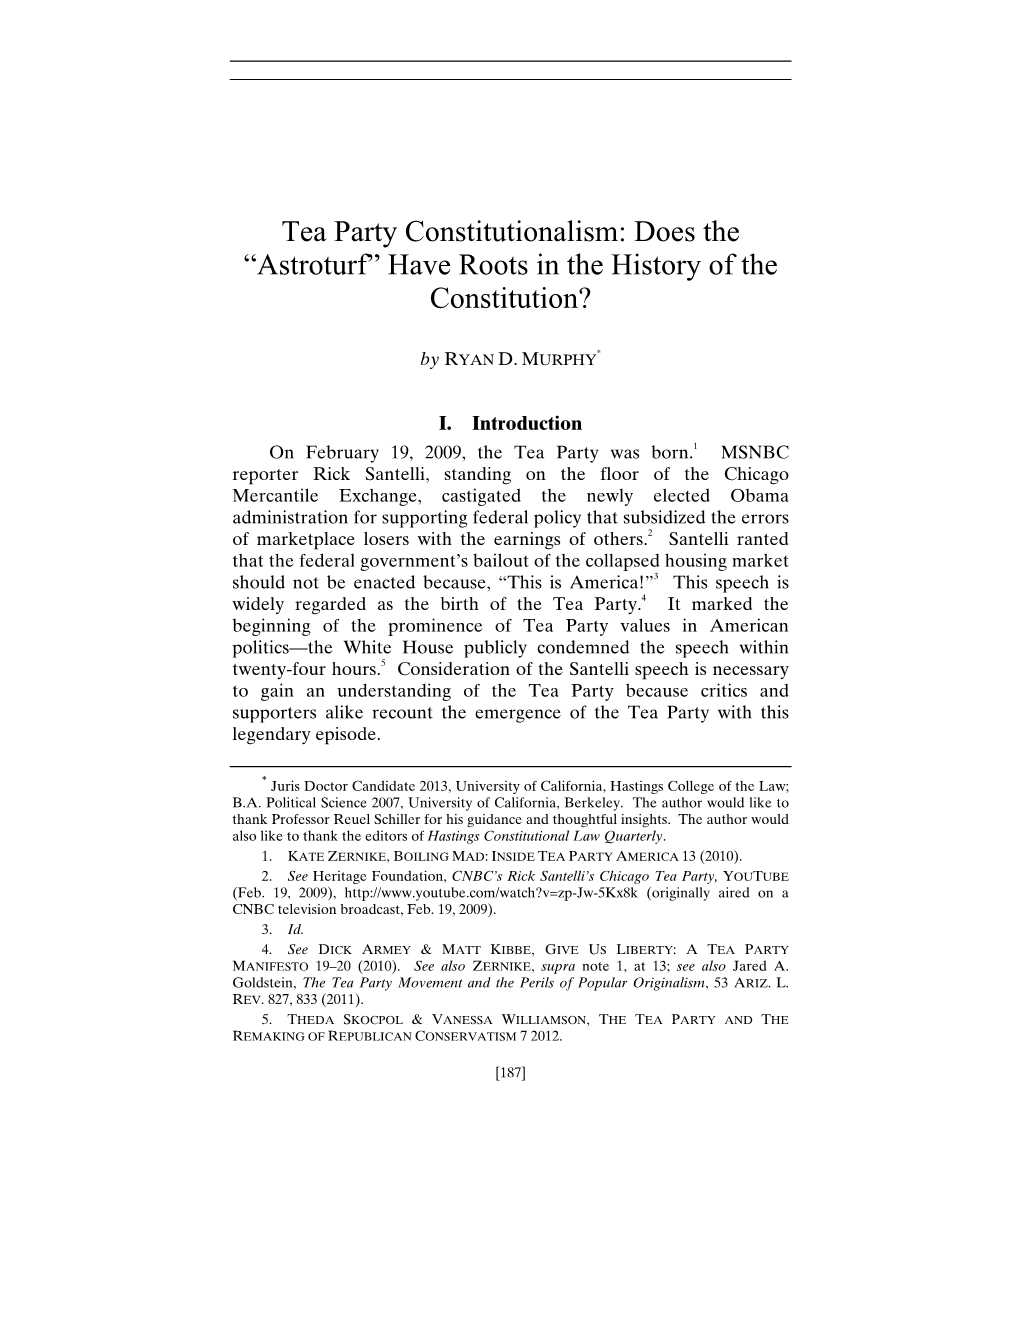 Tea Party Constitutionalism: Does the “Astroturf” Have Roots in the History of the Constitution?